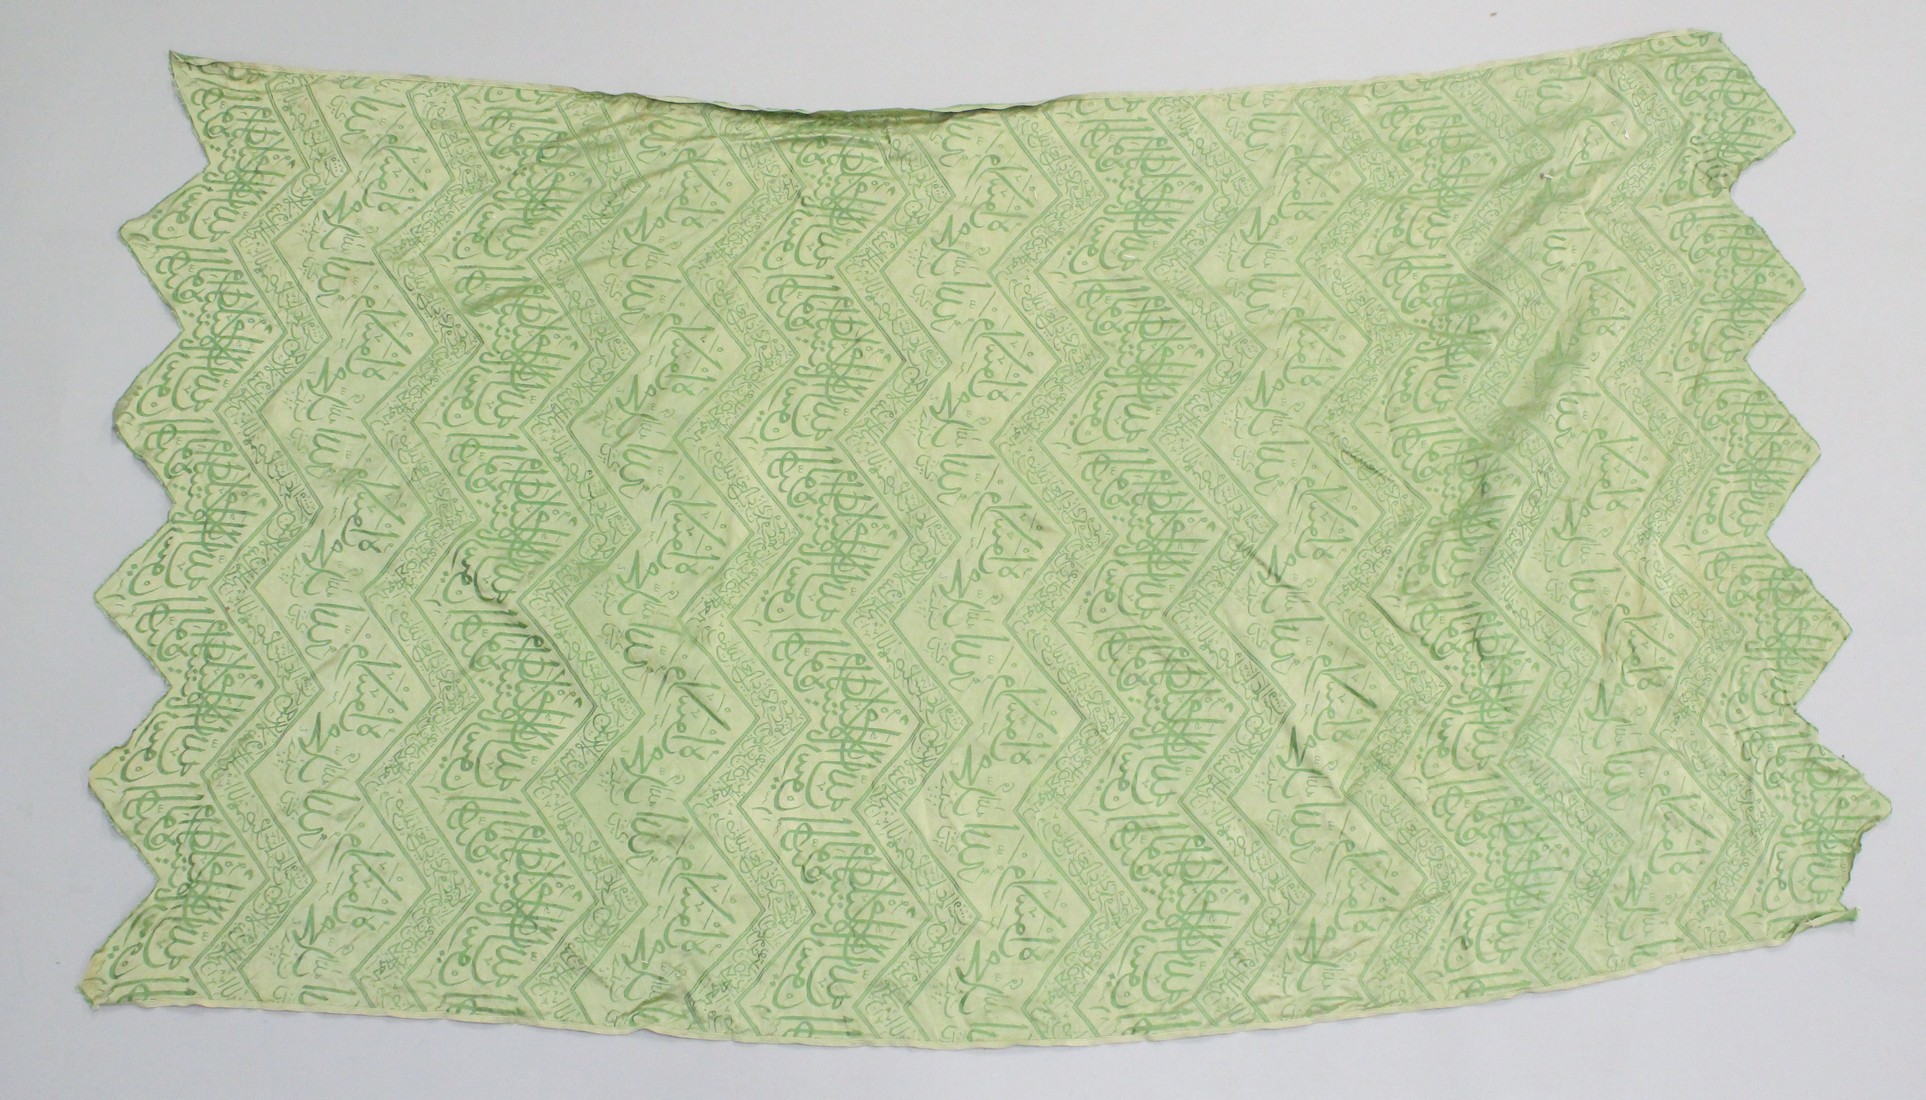 AN ISLAMIC GREEN SILK TEXTILE, embroidered with bands of calligraphy, 150cm x 85cm.